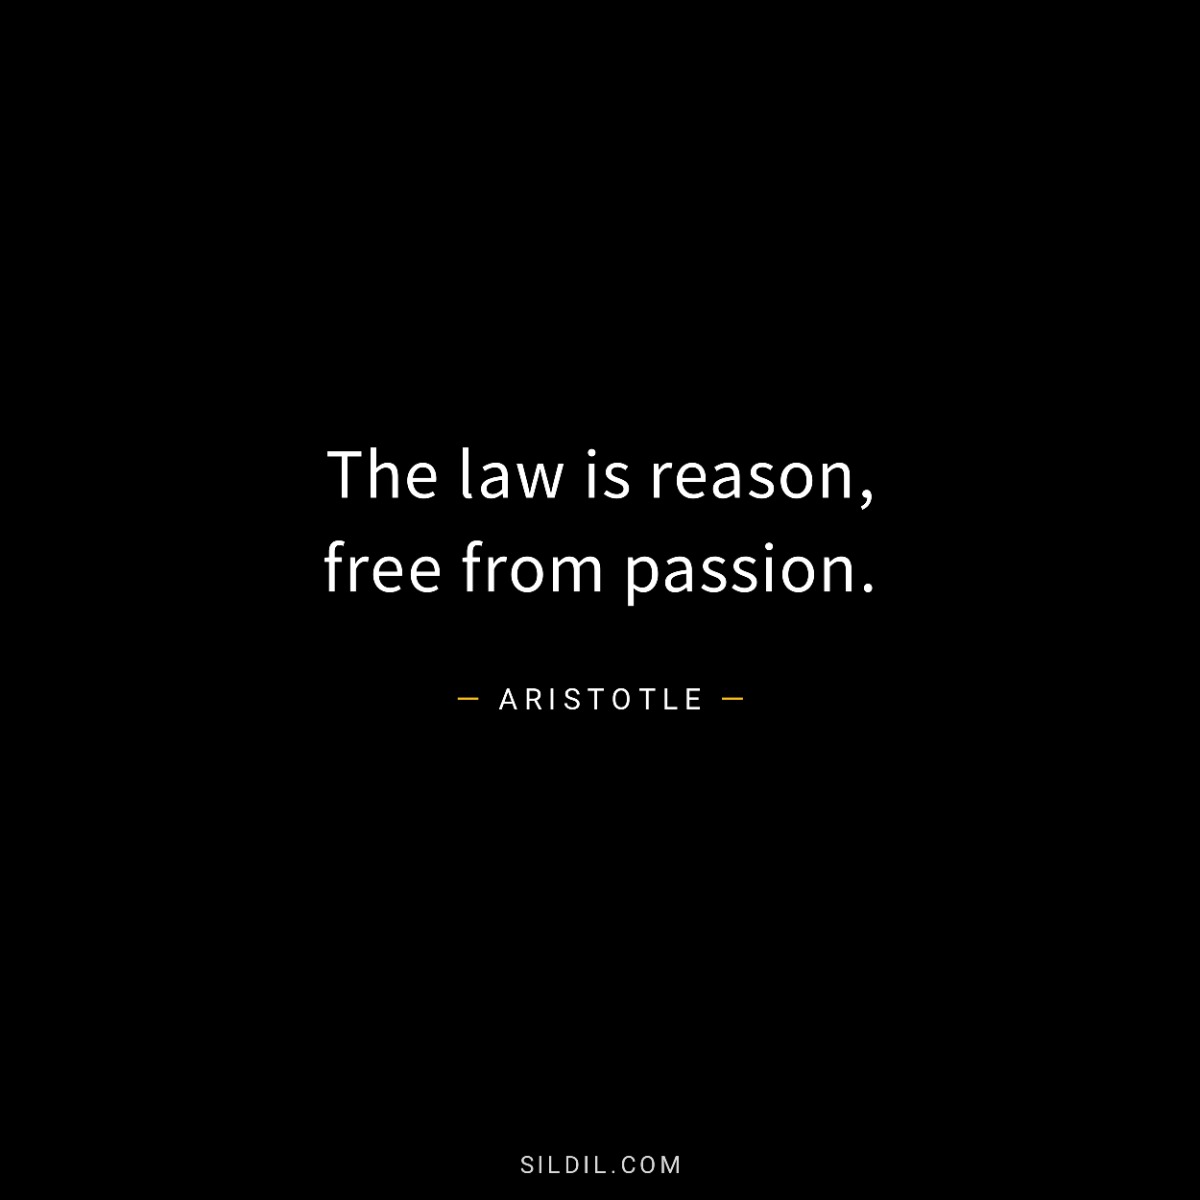 The law is reason, free from passion.